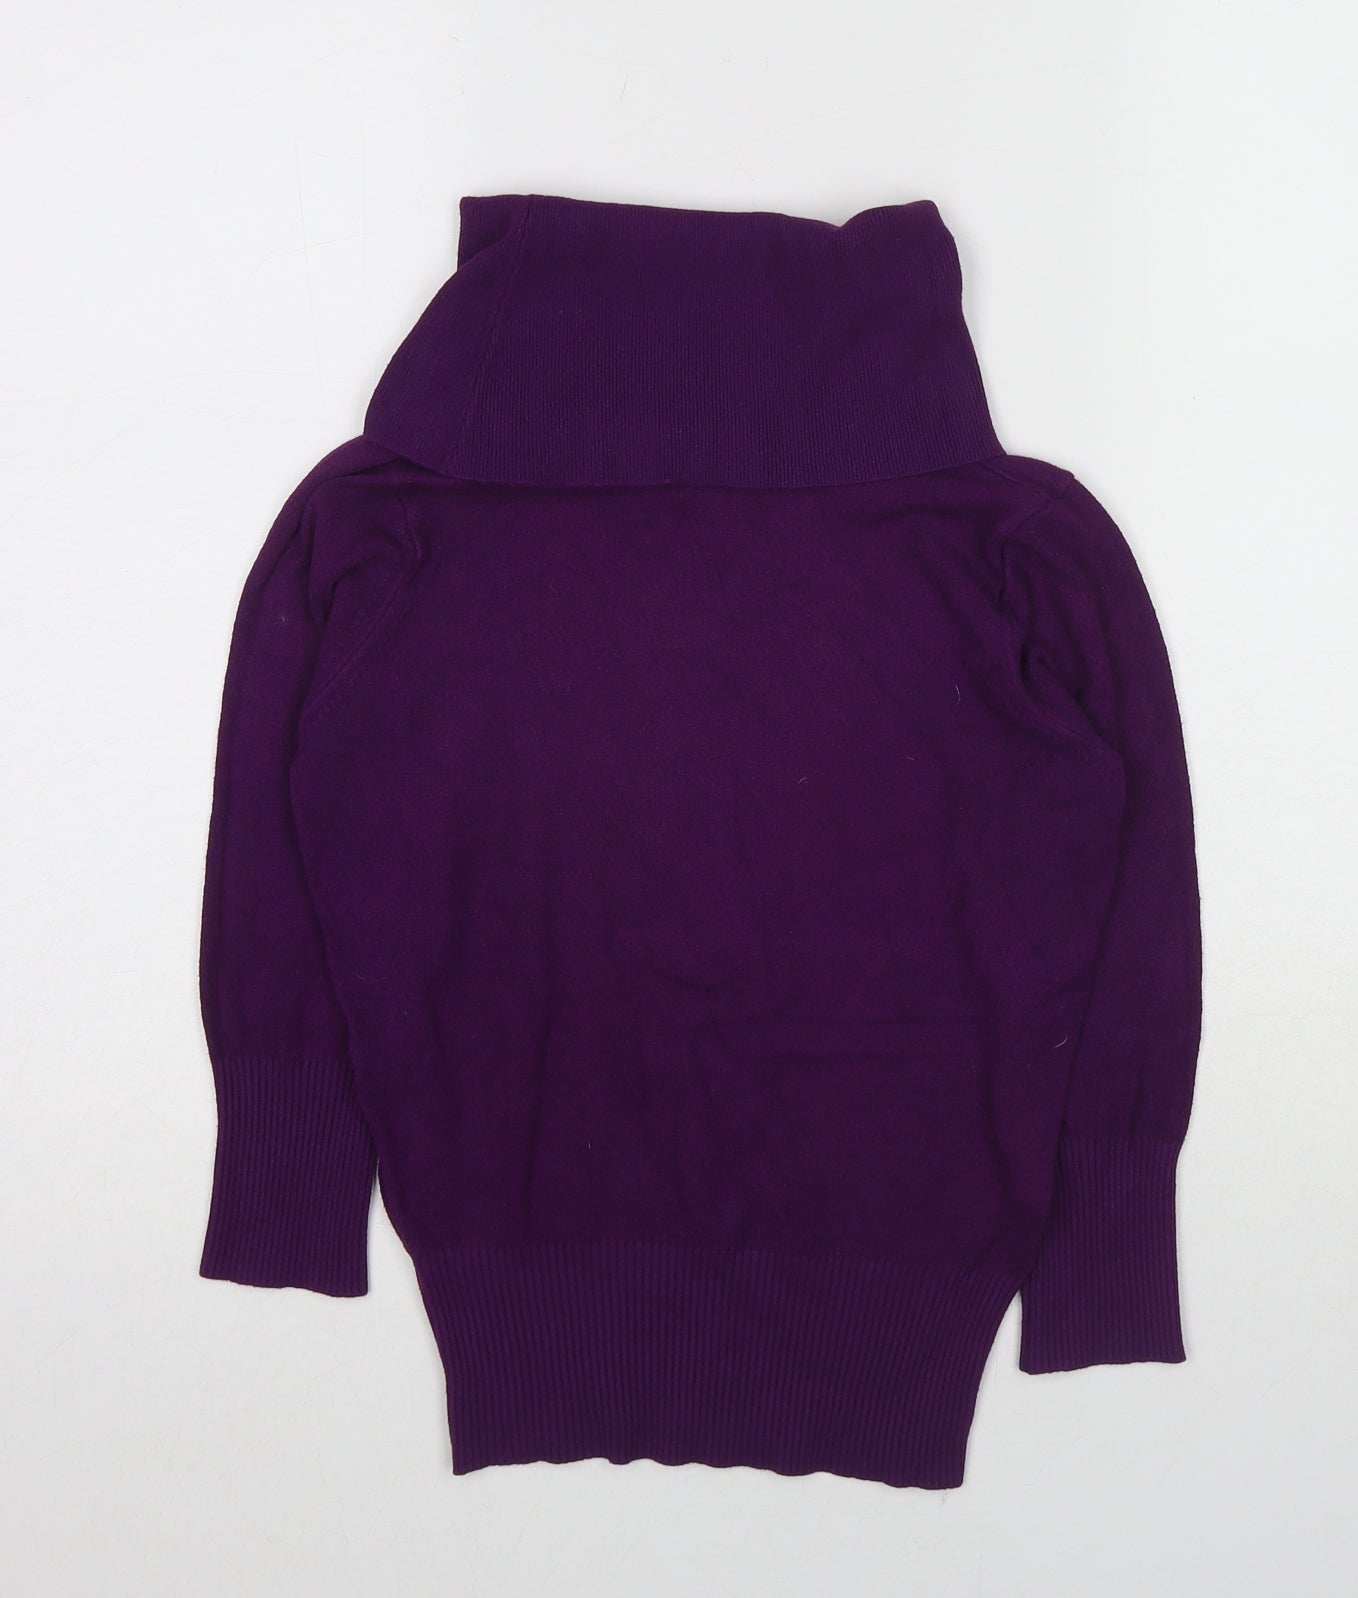 Oasis Womens Purple Roll Neck Viscose Pullover Jumper Size 12